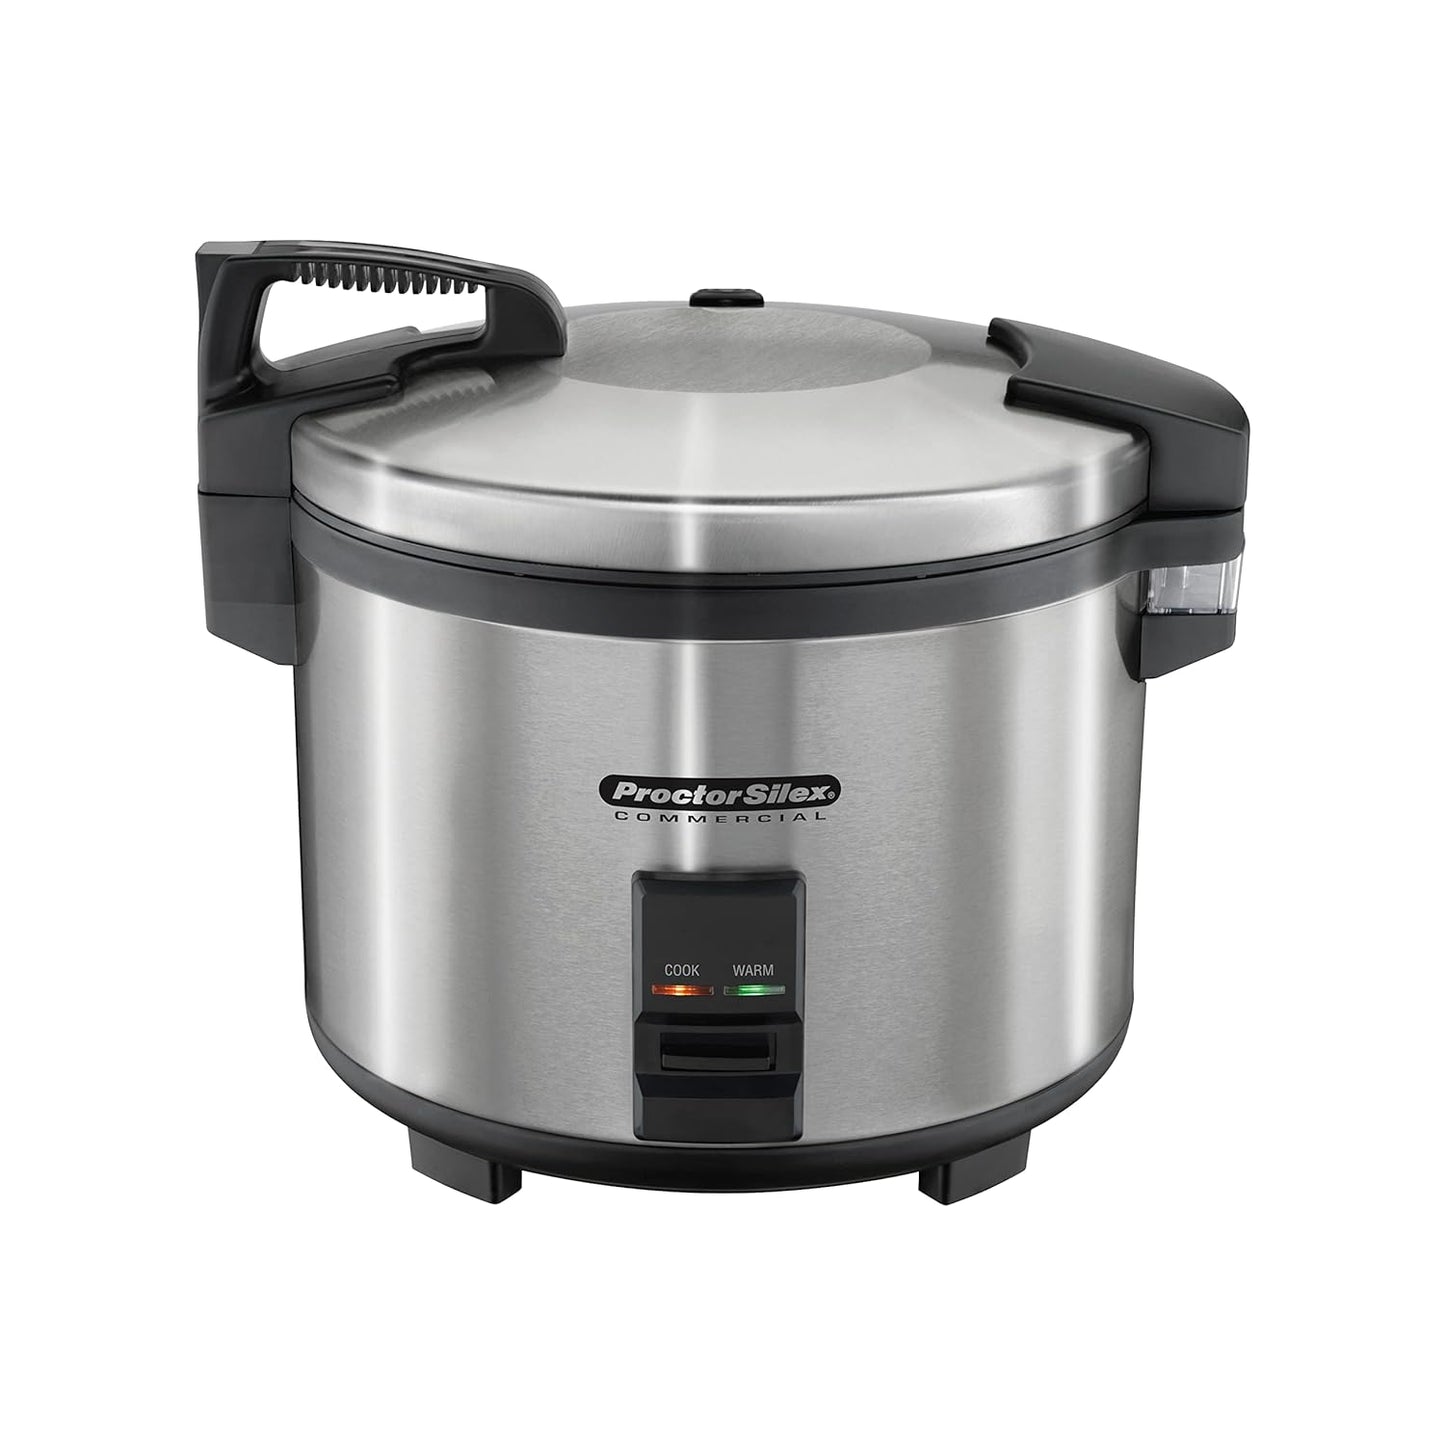 Hamilton Beach Proctor Silex Commercial 37560R Rice Cooker/Warmer, 60 Cups Cooked Rice, Non-Stick Pot, Hinged Lid, Stainless Steel Housing